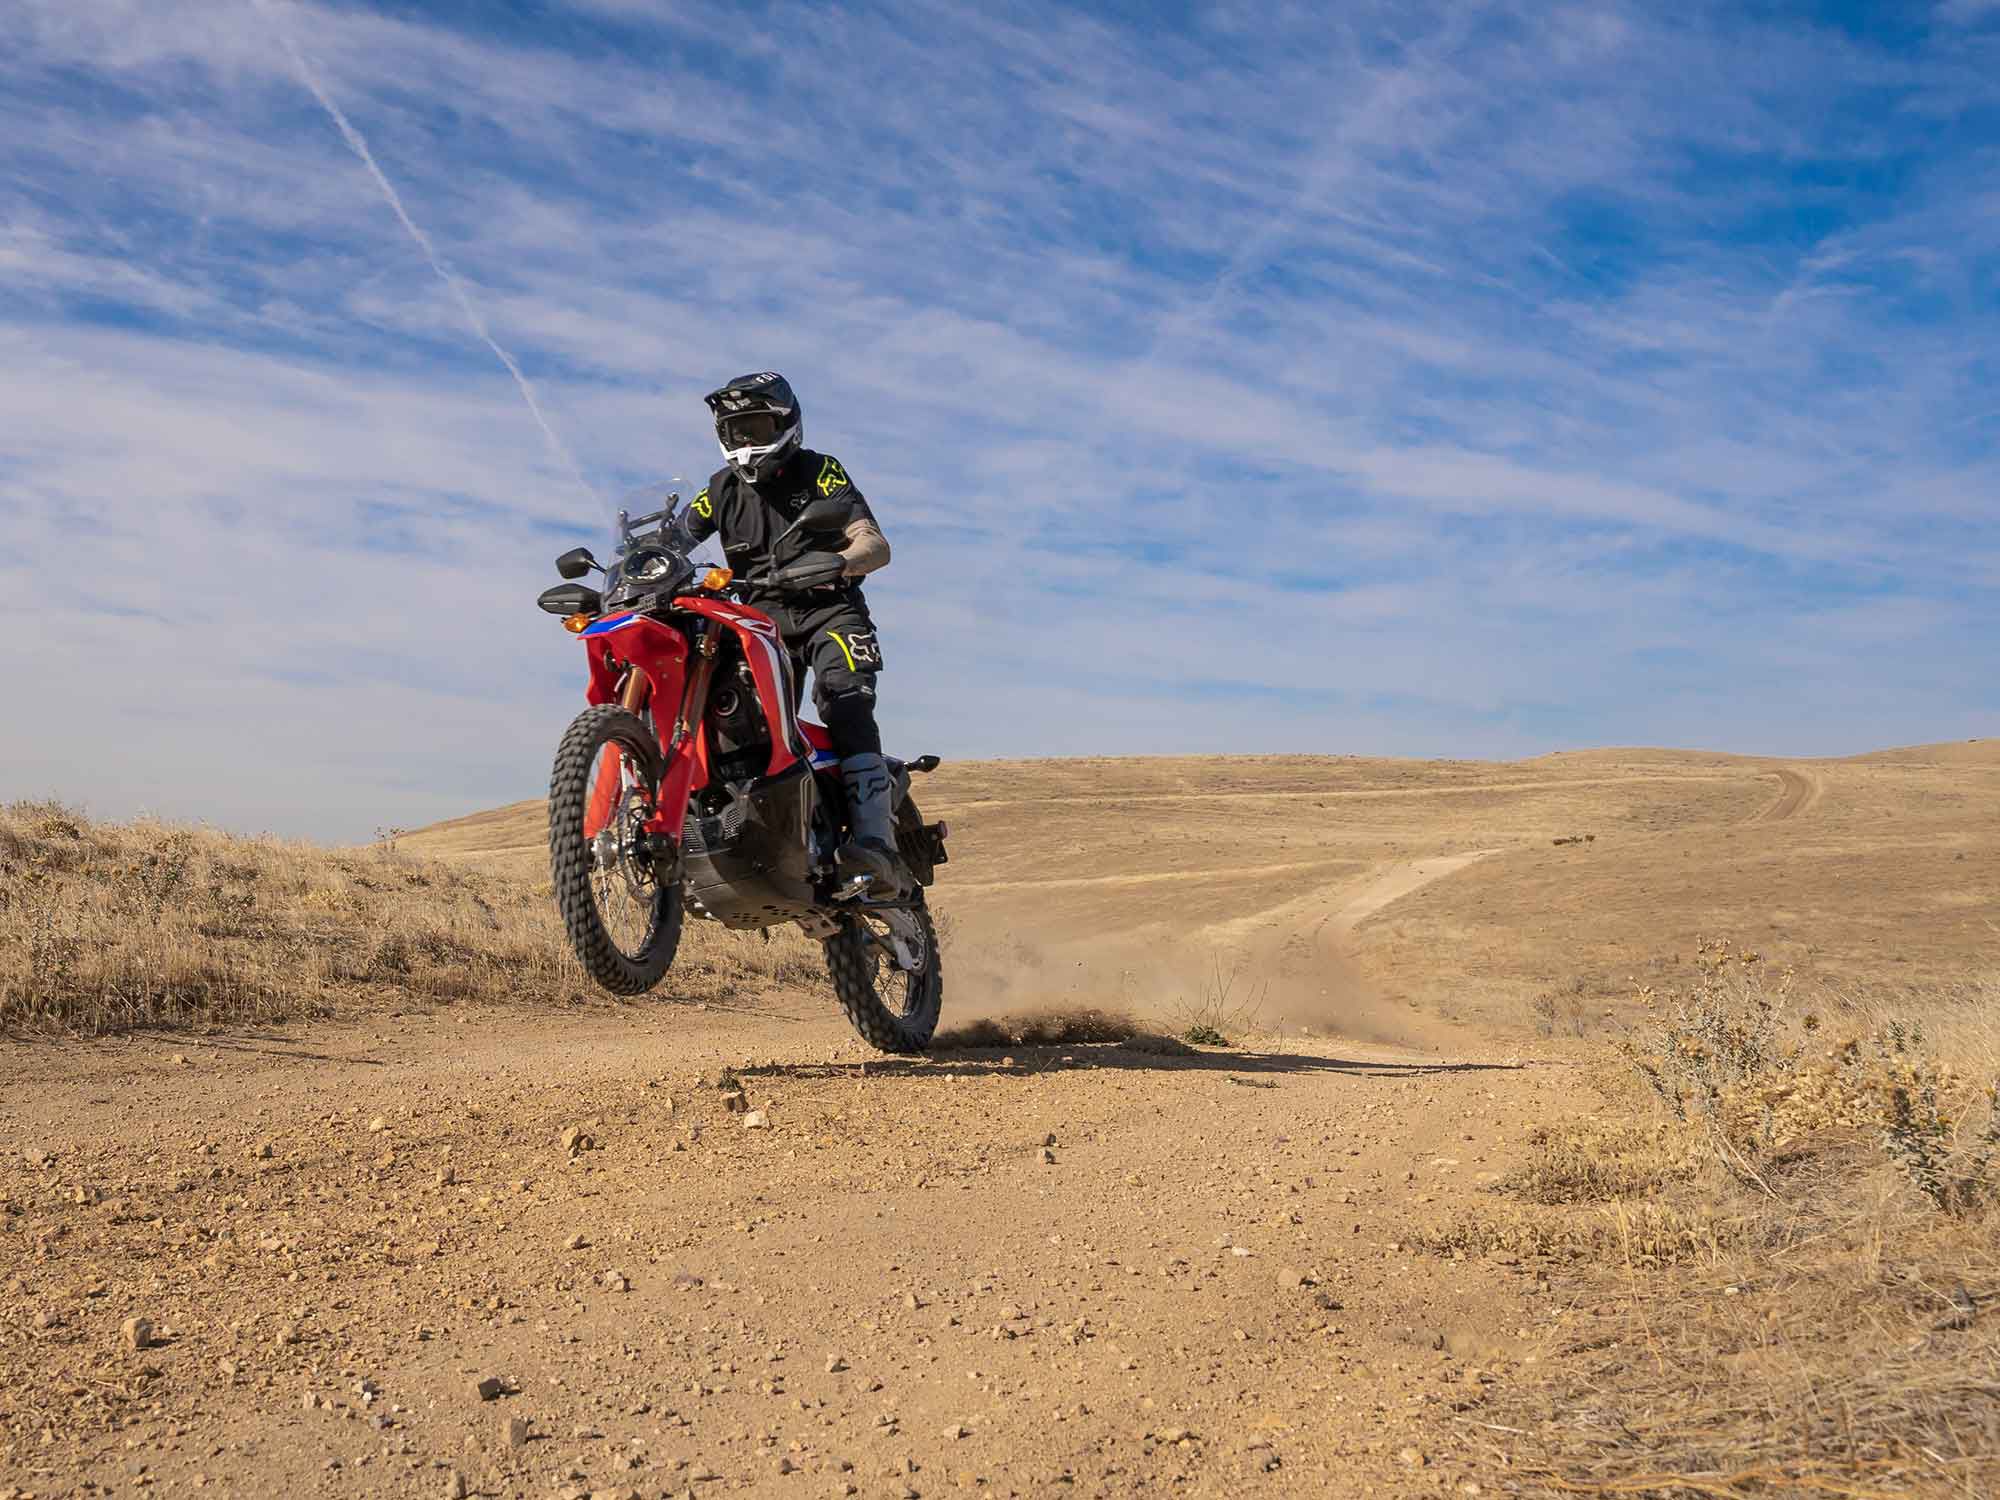 Honda’s CRF300L Rally straddles the line between low-displacement adventure bike and dual sport, tending more toward the off-road side.